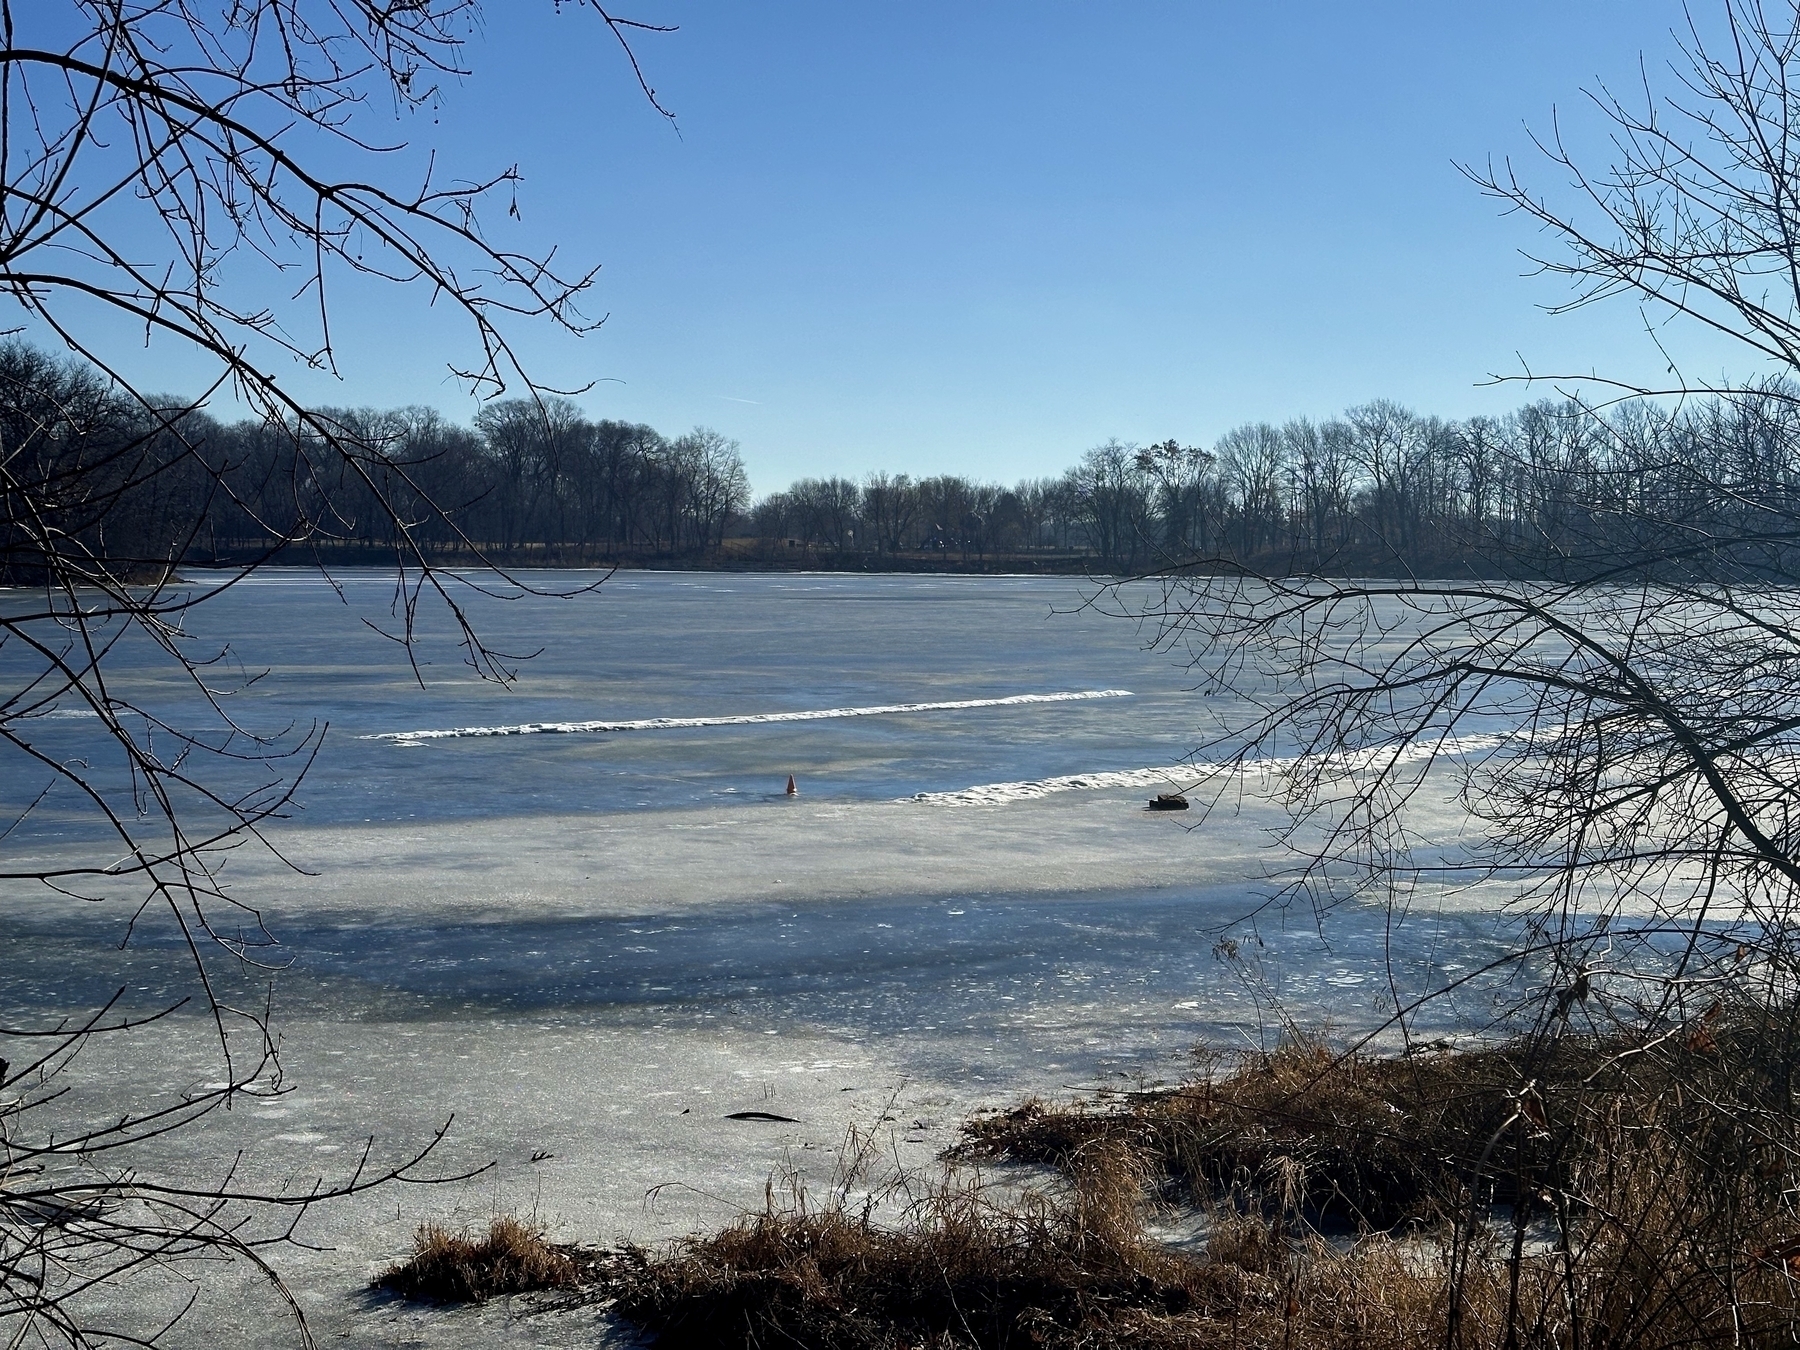 A frozen lake, with tracks on the surface, is flanked by bare trees and a clear blue sky.